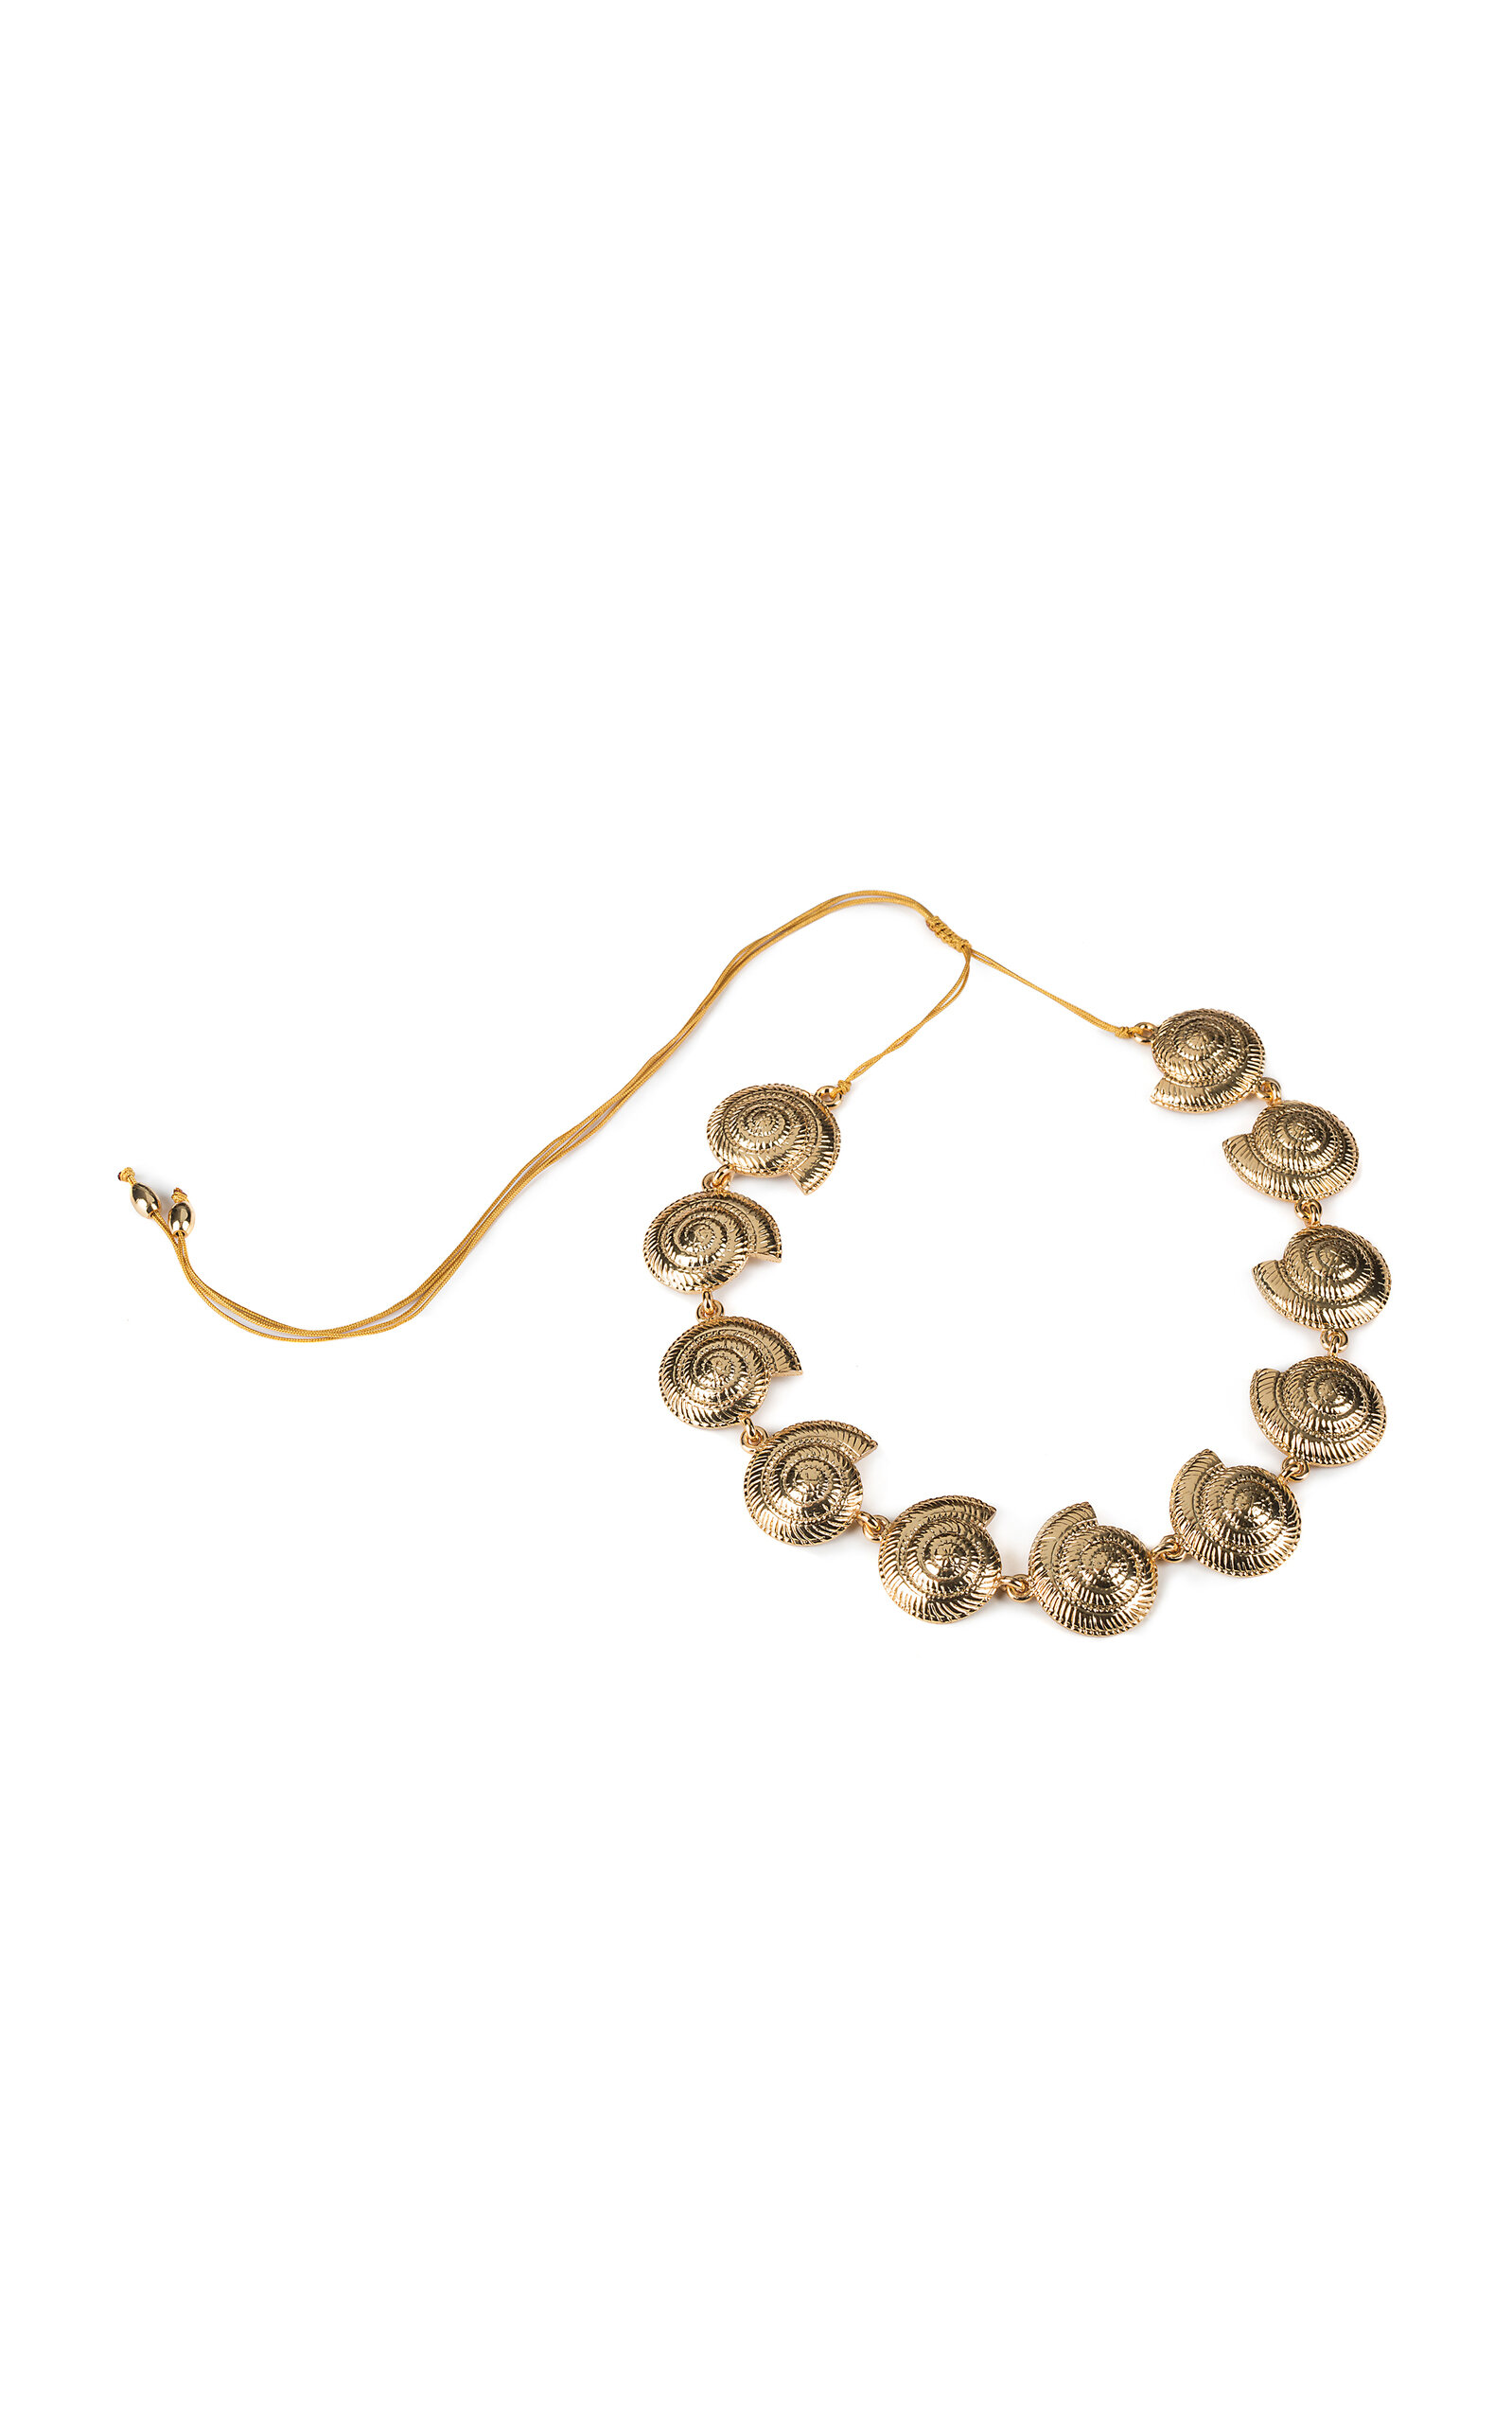 Concha Archi 24k Gold-Plated Shell Necklace